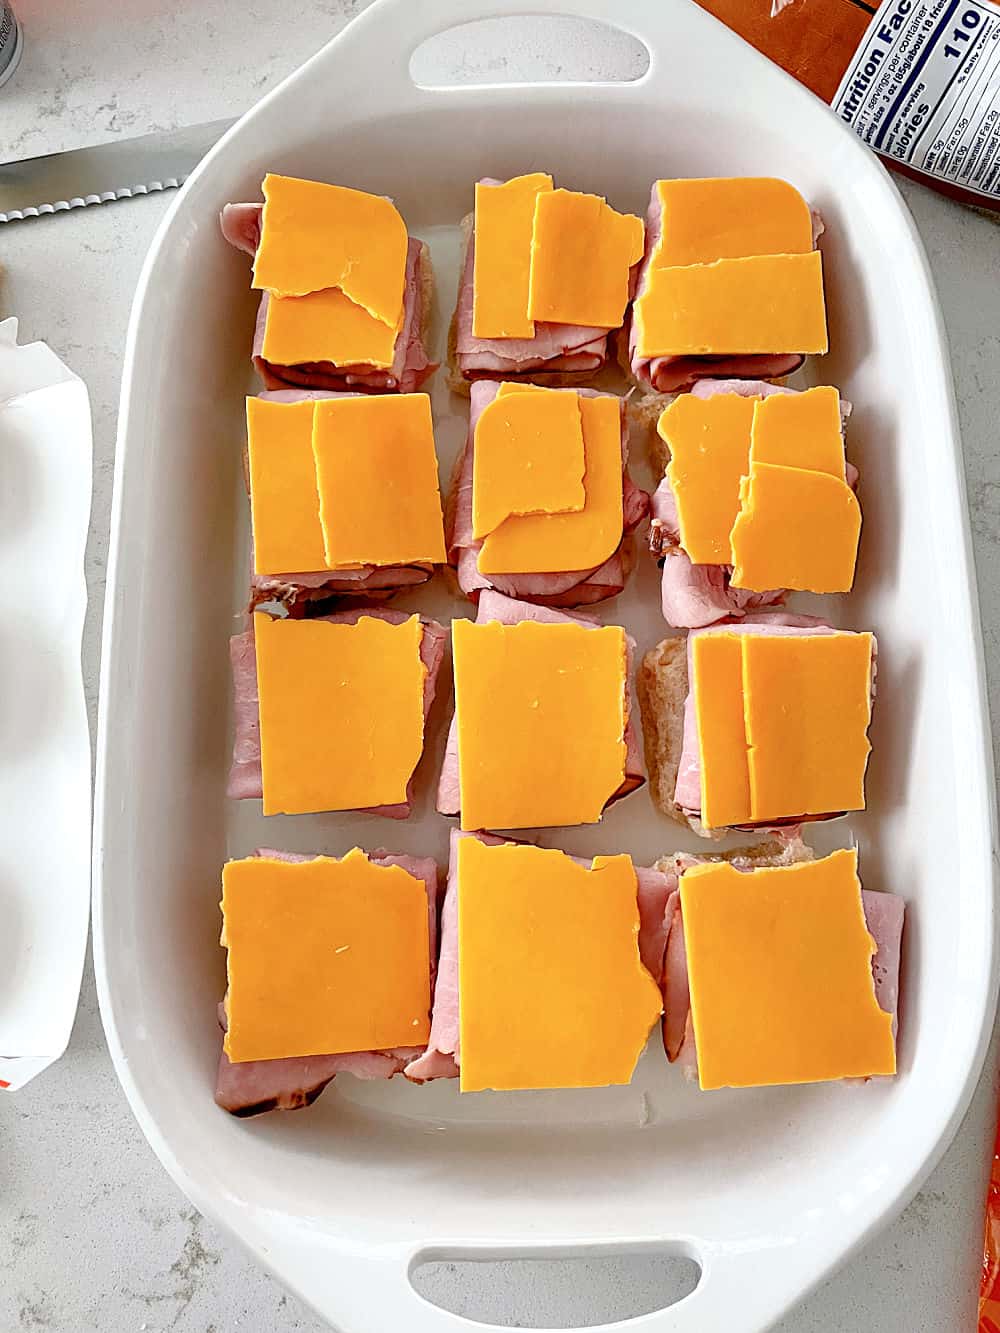 https://www.sixsistersstuff.com/wp-content/uploads/2011/08/ham-and-cheese-added-on-top-of-slider-rolls-in-9x13-pan.jpg